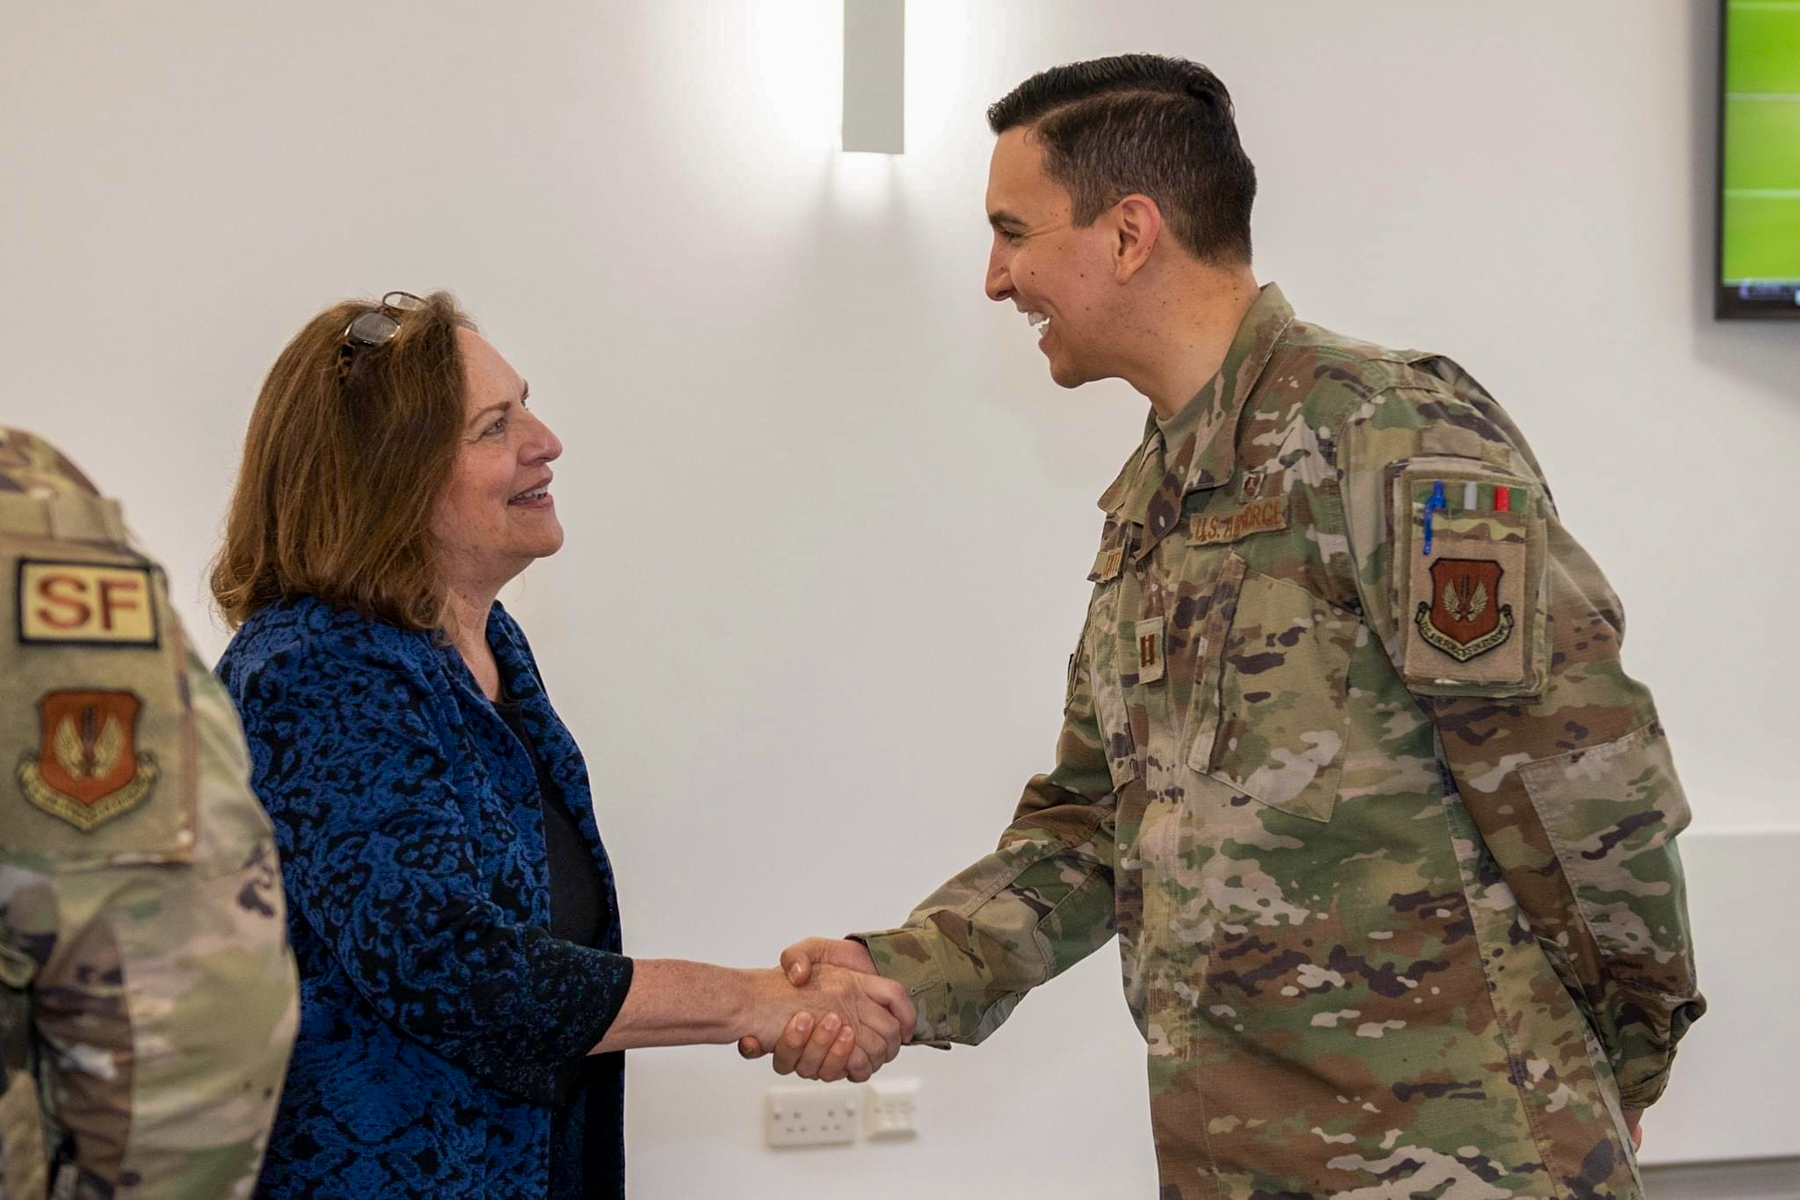 a man wearing military fatigues shakes a woman's hand